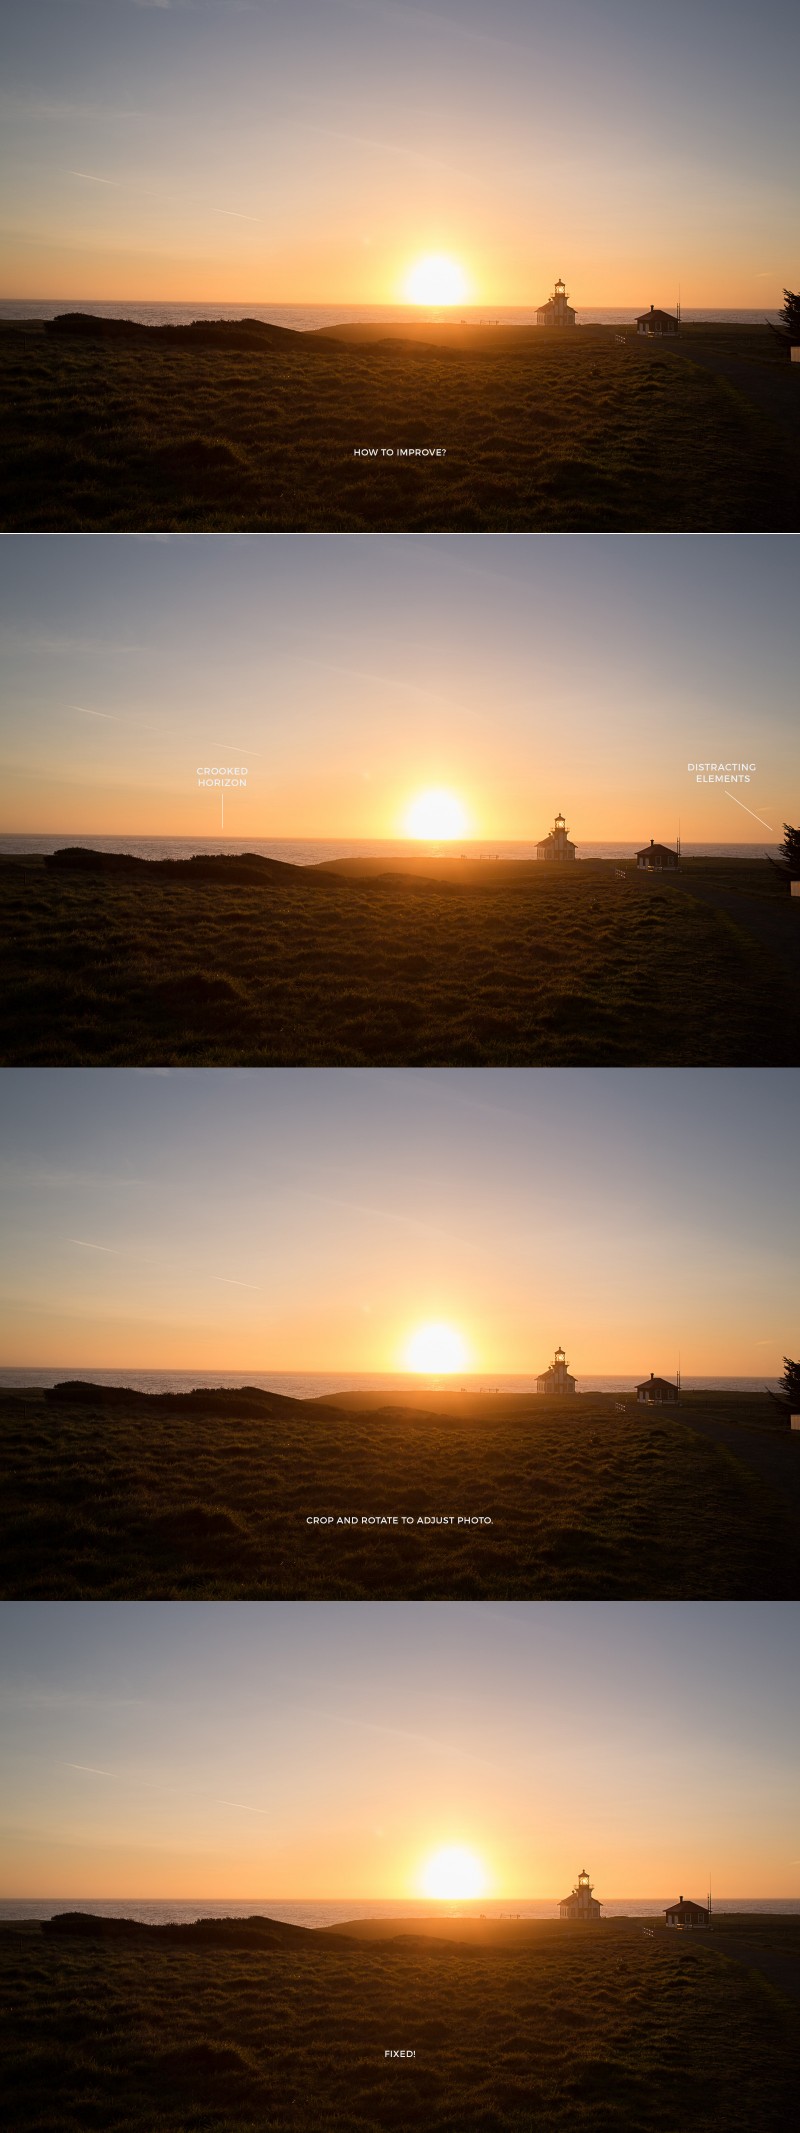 How to Photograph a Sunset